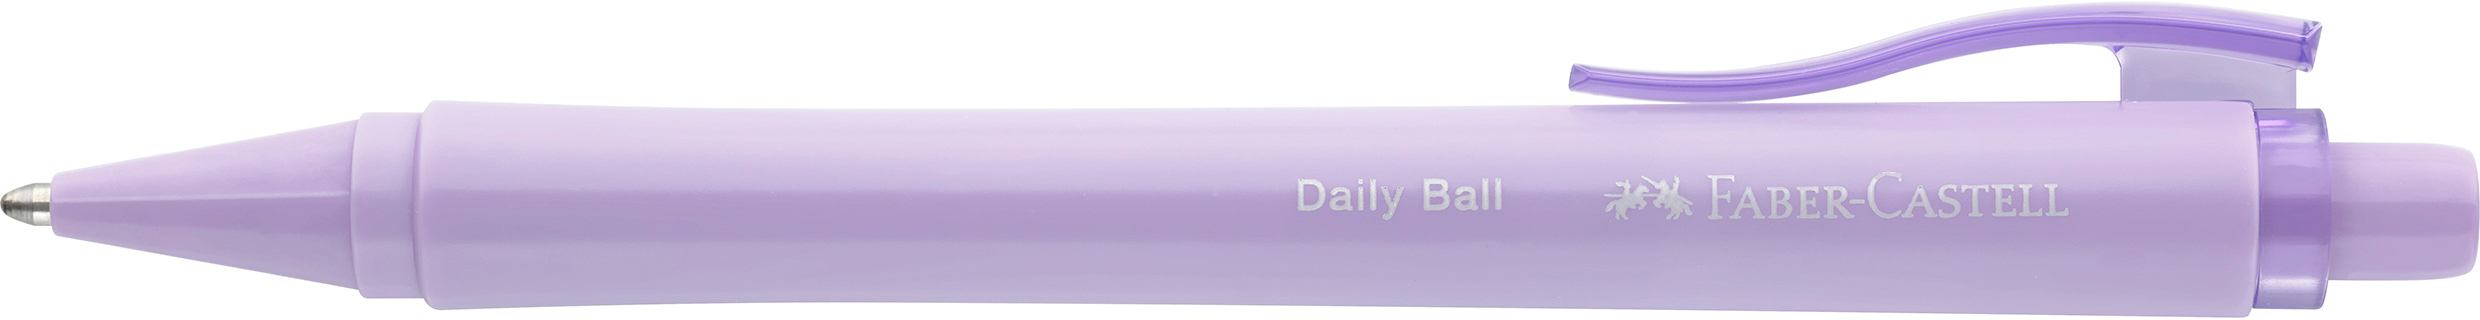 FABER-CASTELL Stylo à bille Daily Ball XB 140688 sweet lilac sweet lilac